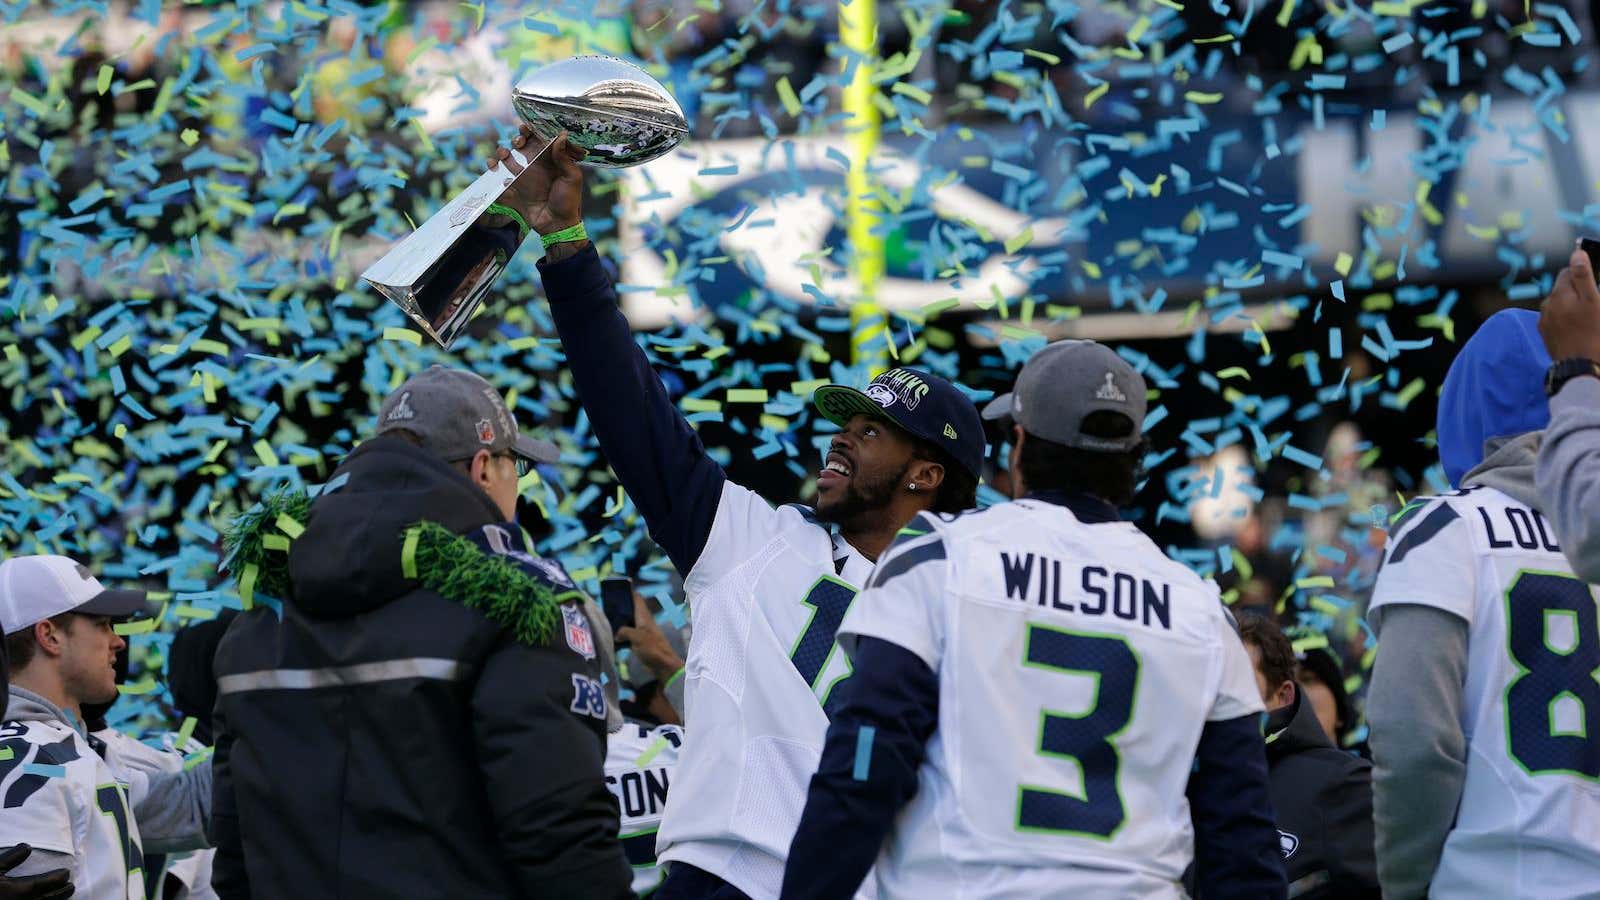 Will the Seahawks win it again this year?